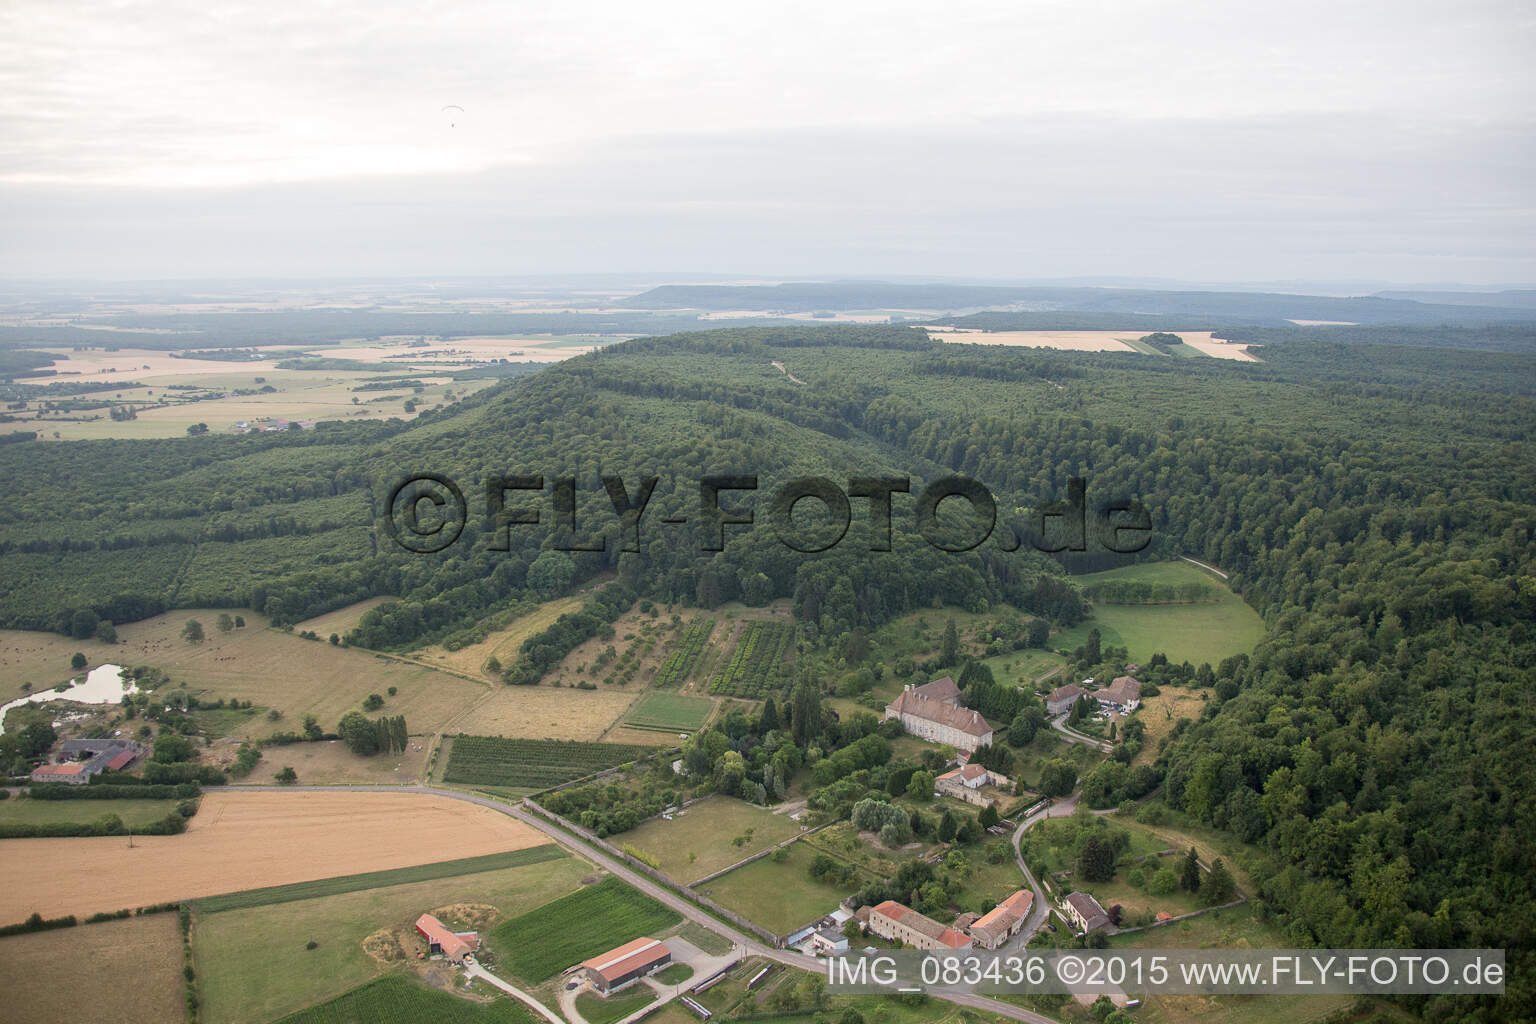 Aerial view of Geville in the state Meuse, France